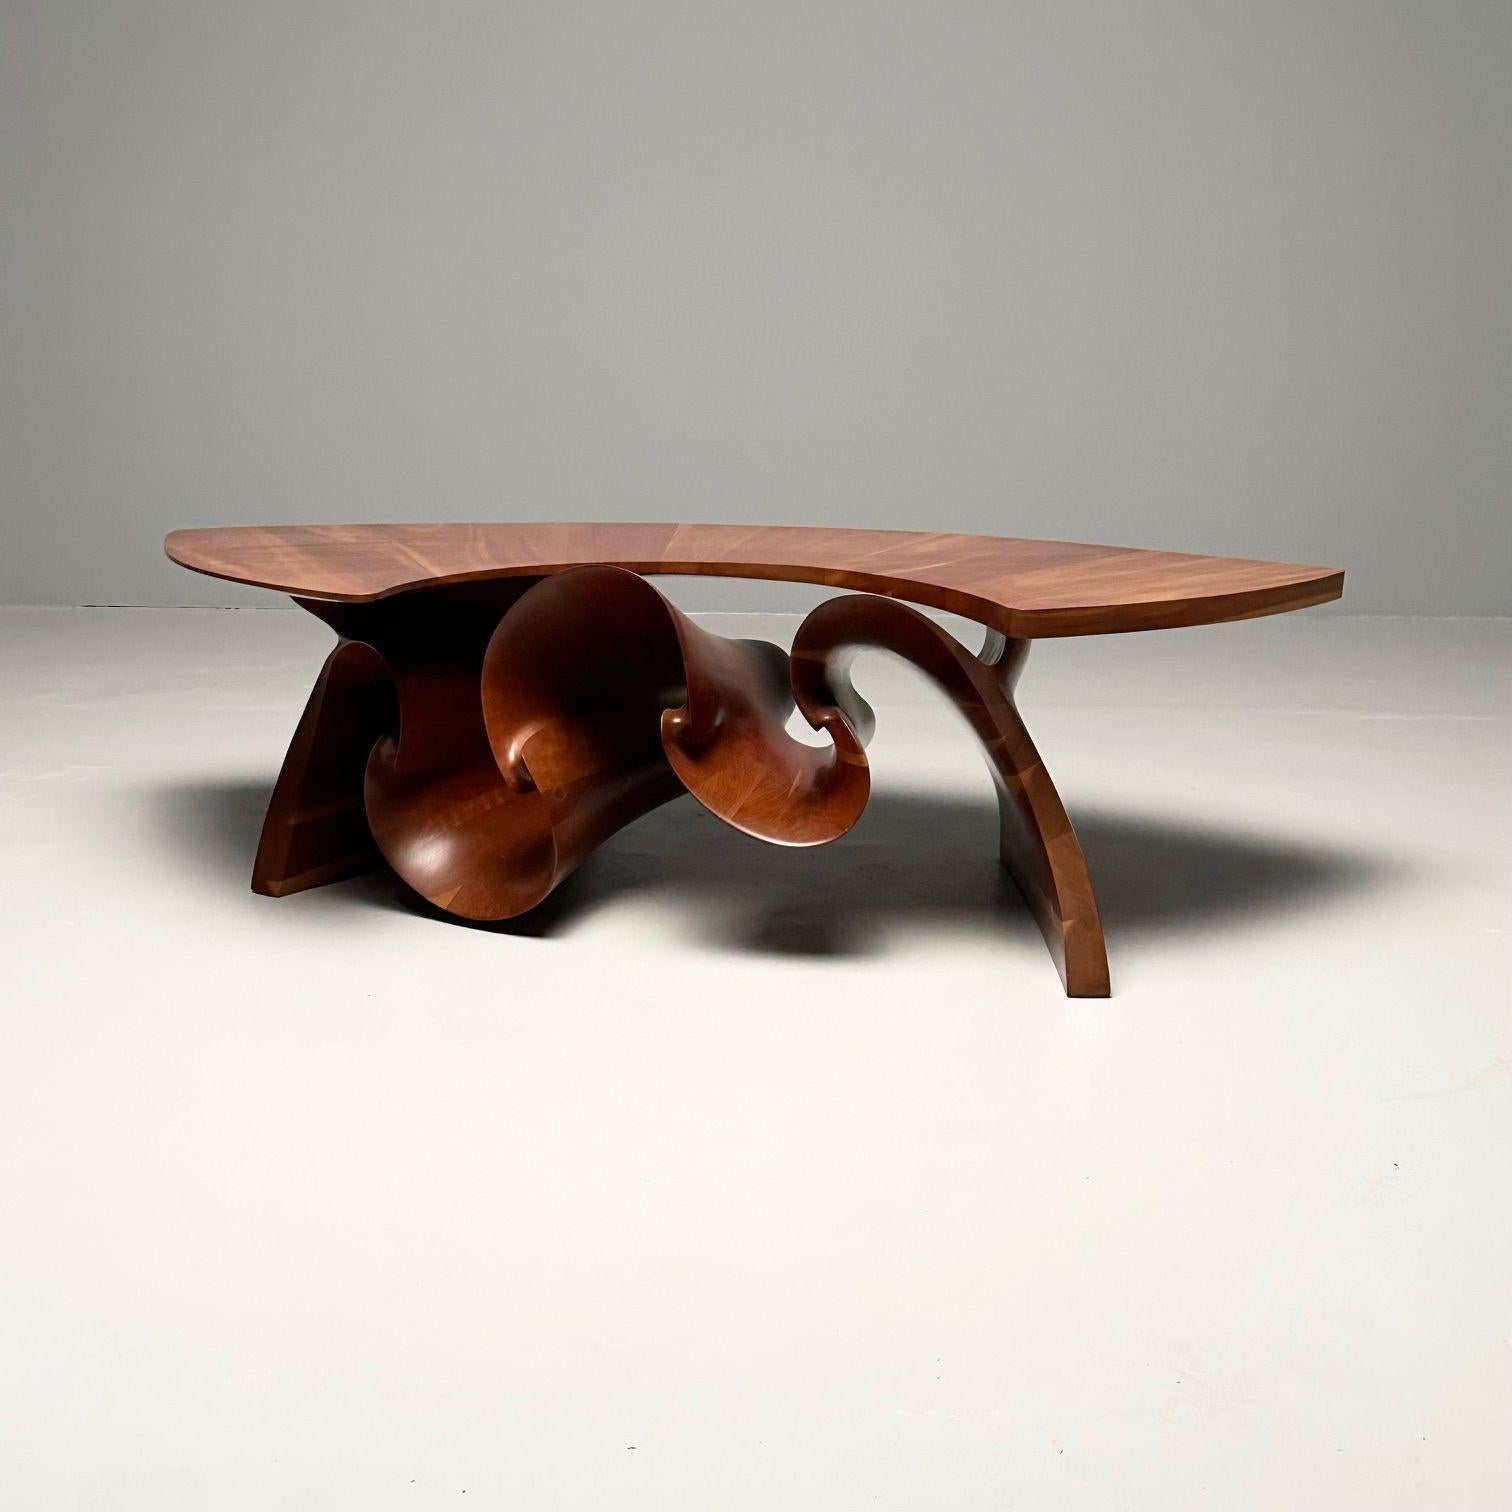 Peter Michael Adams, Mid-Century, Sculptural Coffee Table, Walnut, USA, 1970s For Sale 3